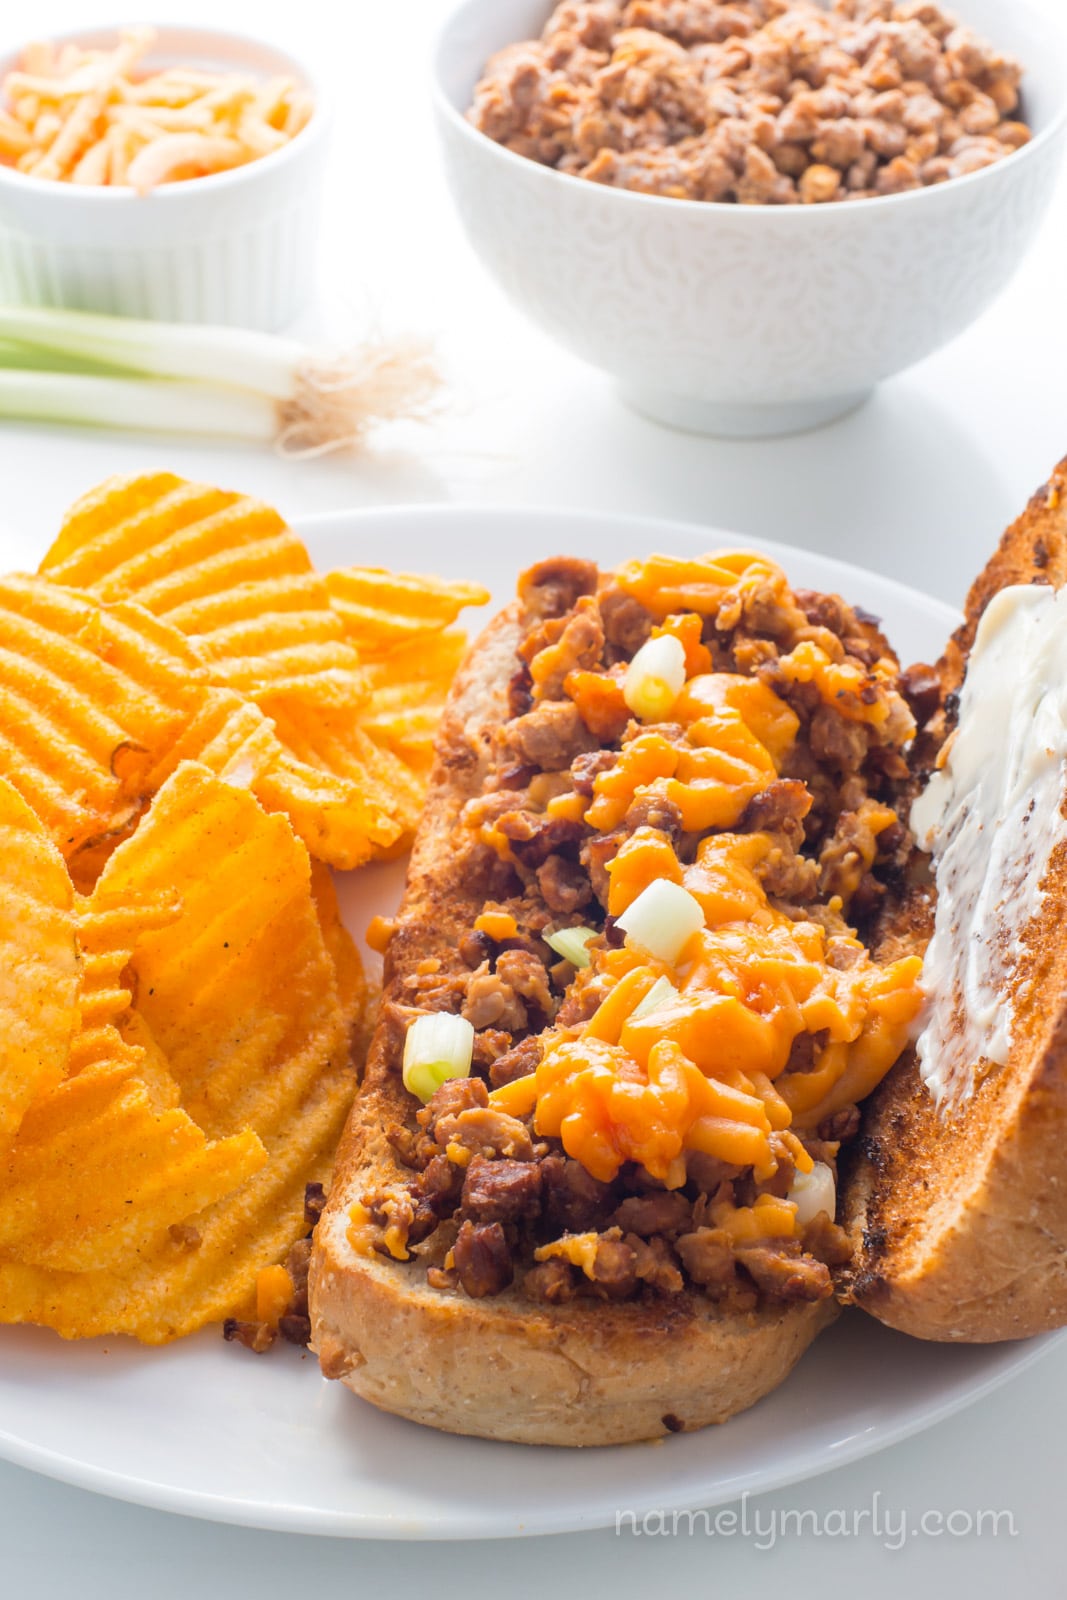 A vegan chopped cheese sandwich sits on a plate next to potato chips with ingredients in the background to make more.